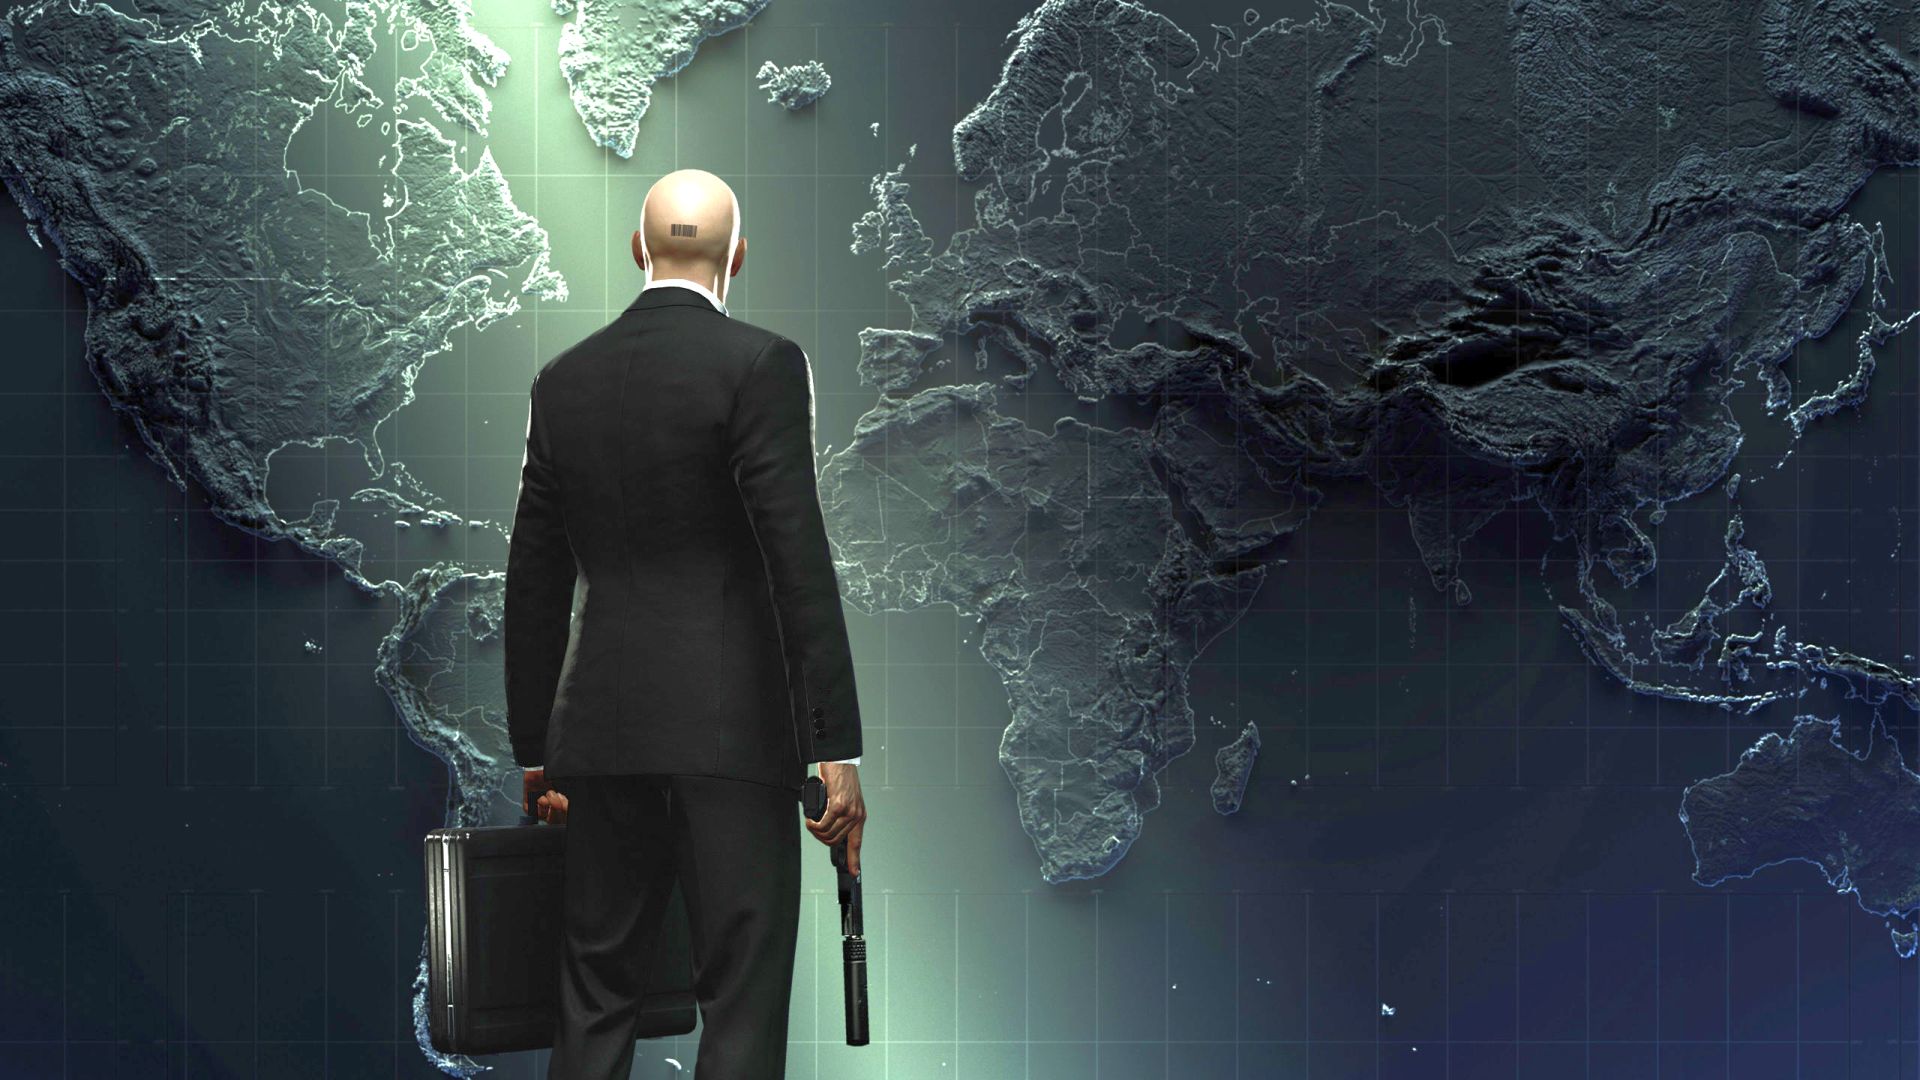 Hitman 3 is coming to Steam and PC Game Pass